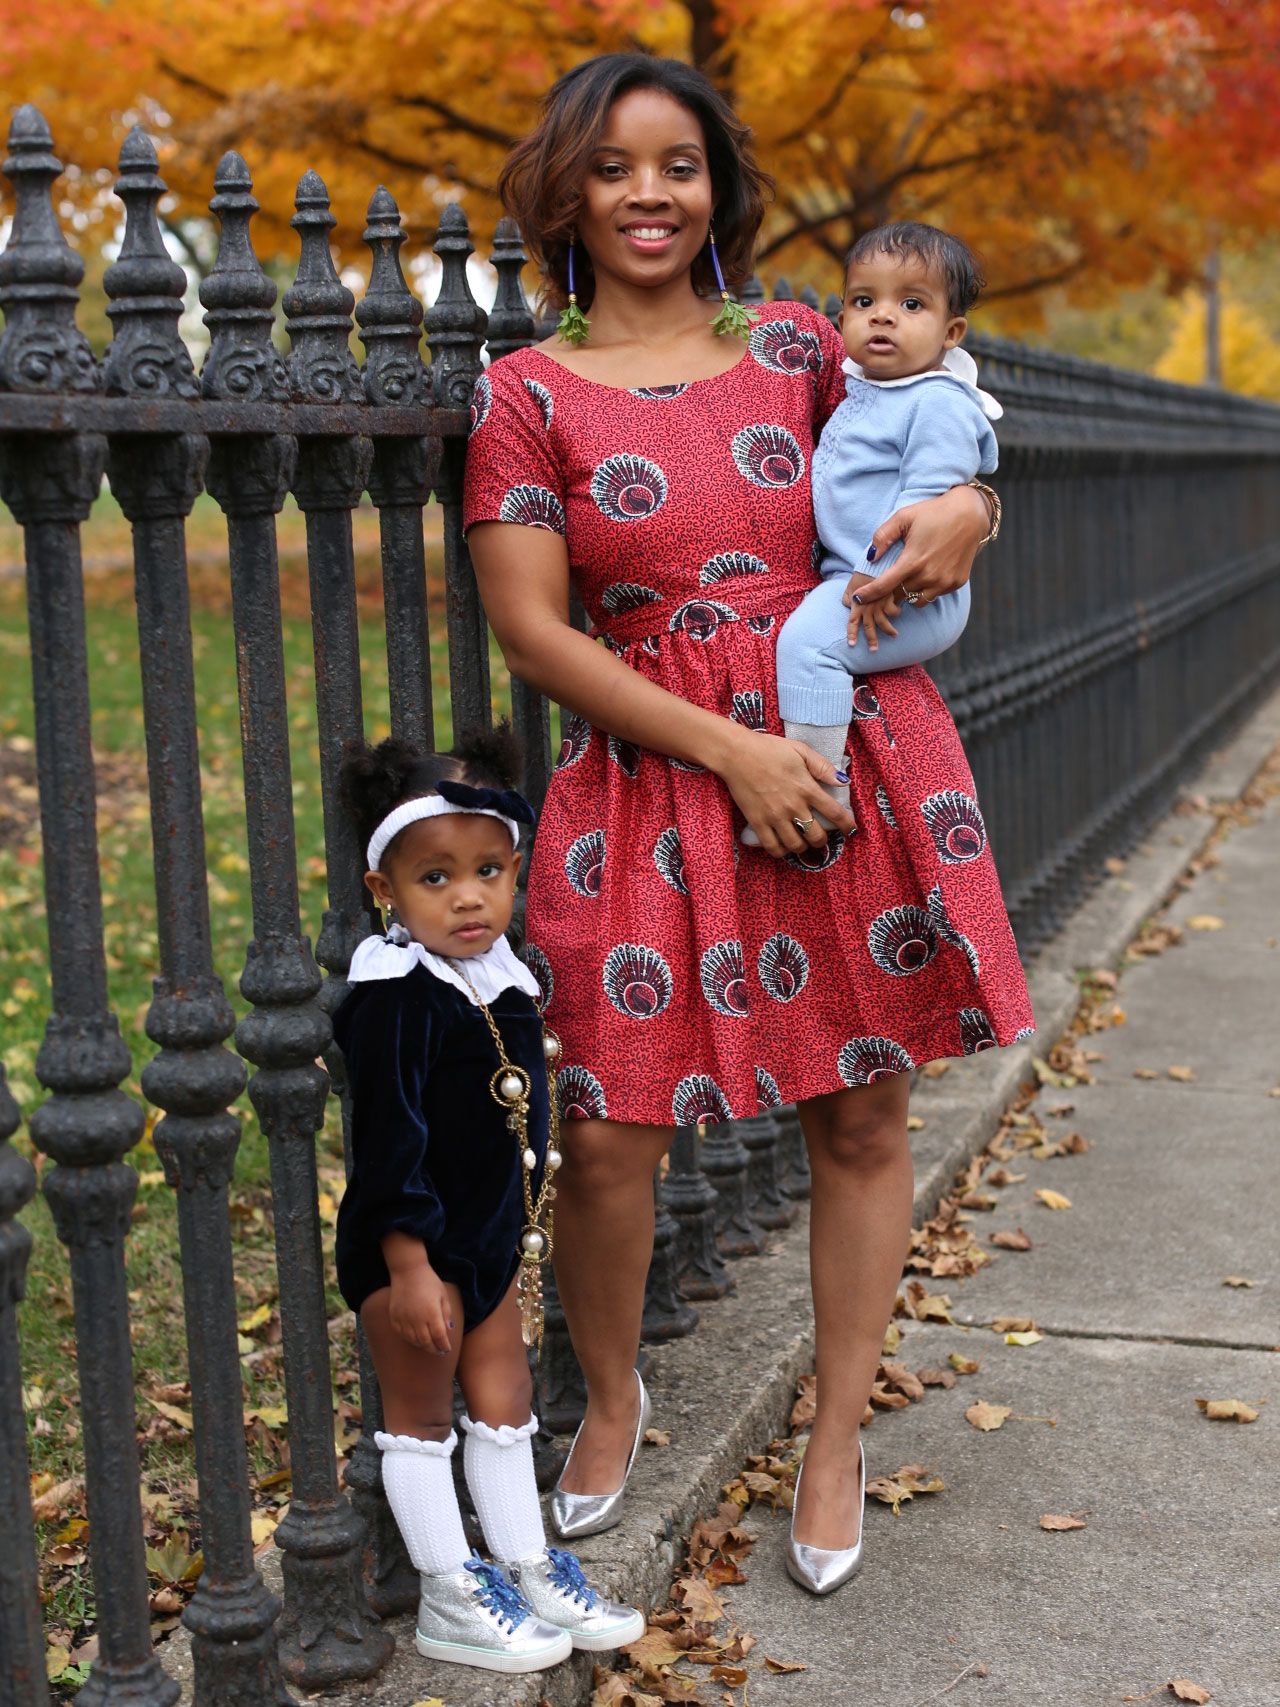 Carlotta Penn poses in a park with her two children.